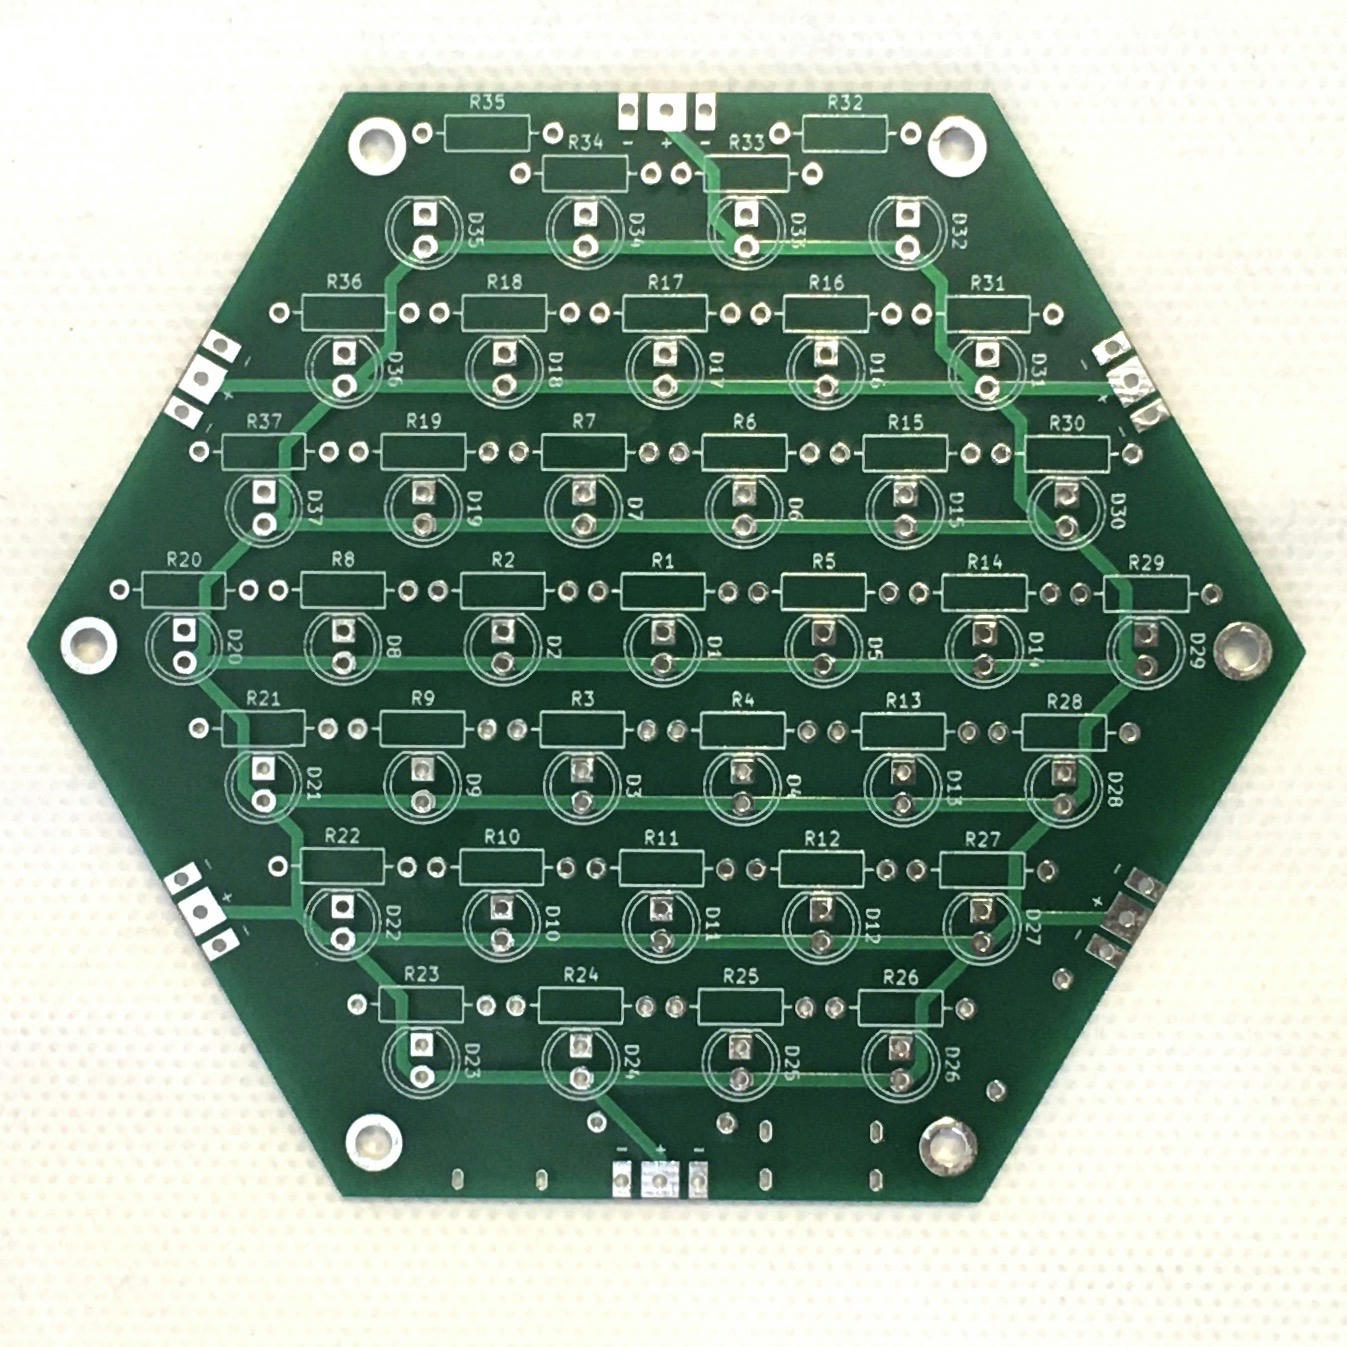 TODO front of the circuit board